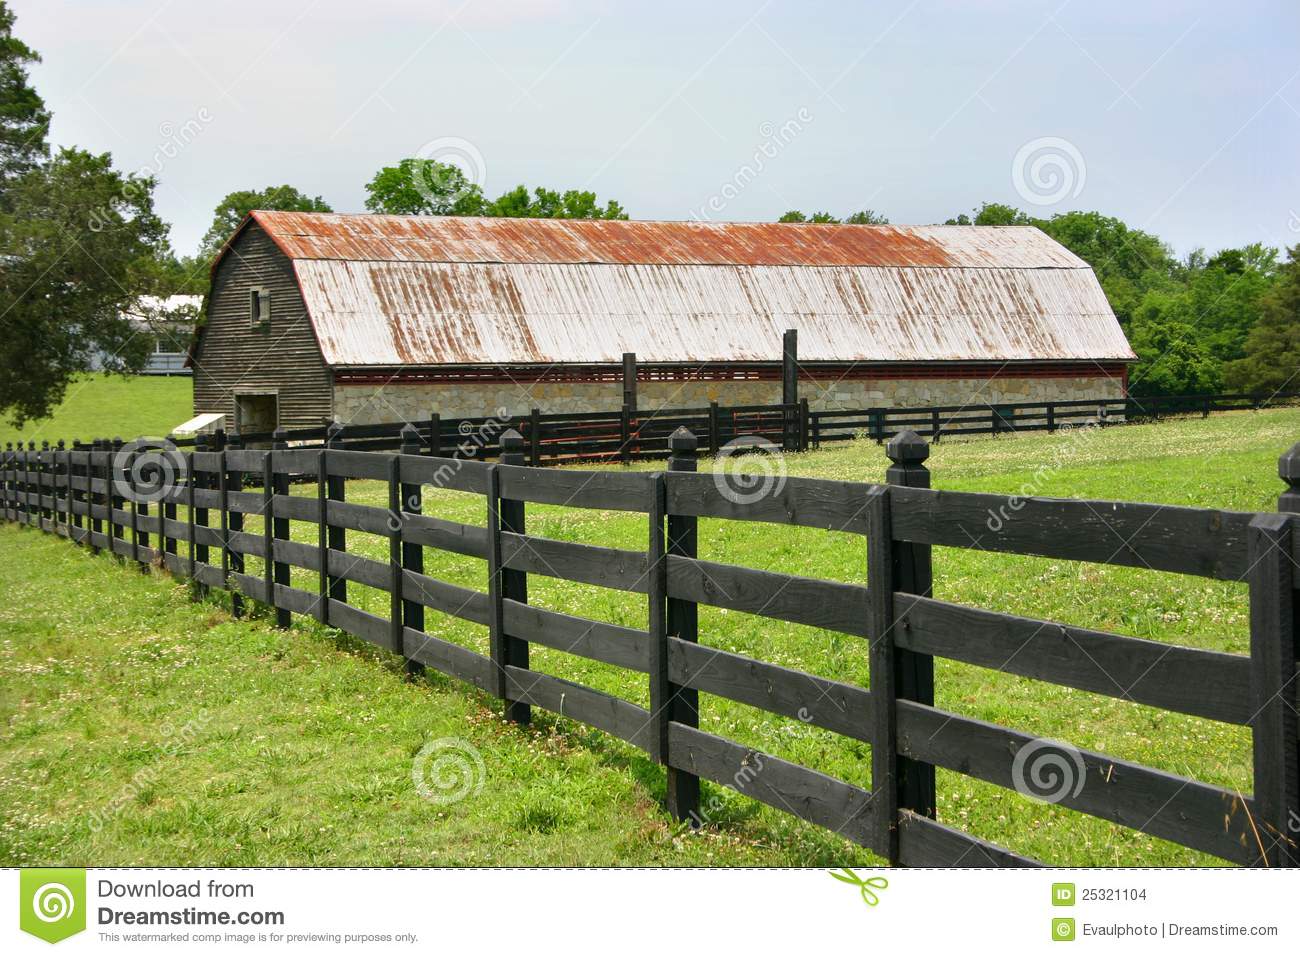 Fence   Barn Stock Images   Image  25321104